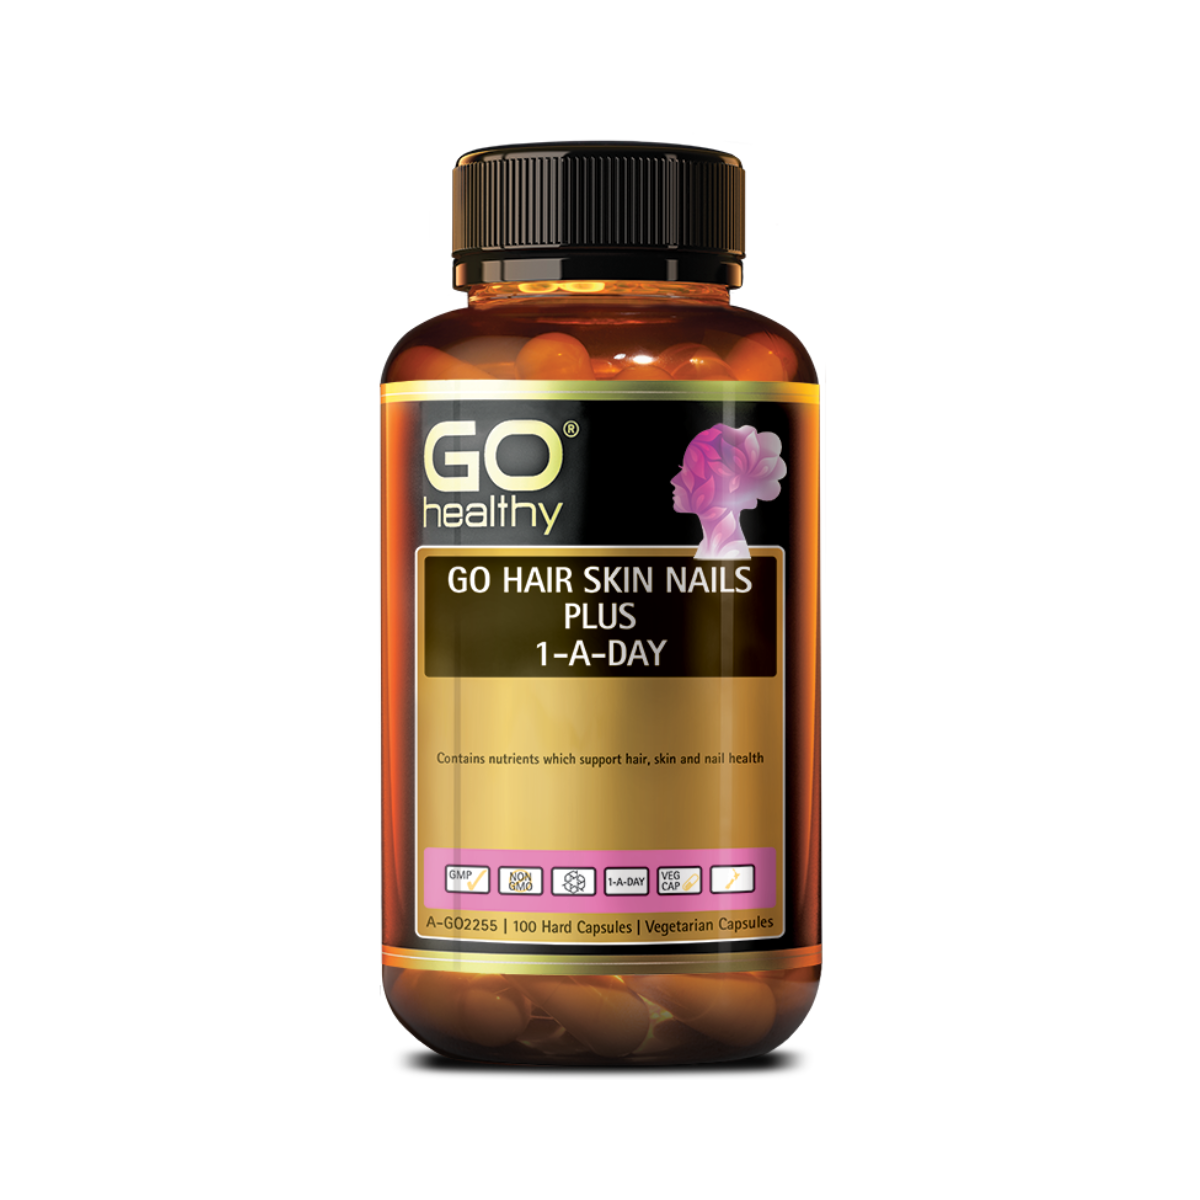 Go Healthy Hair Skin Nails Plus 1-A-DAY 100 Capsules